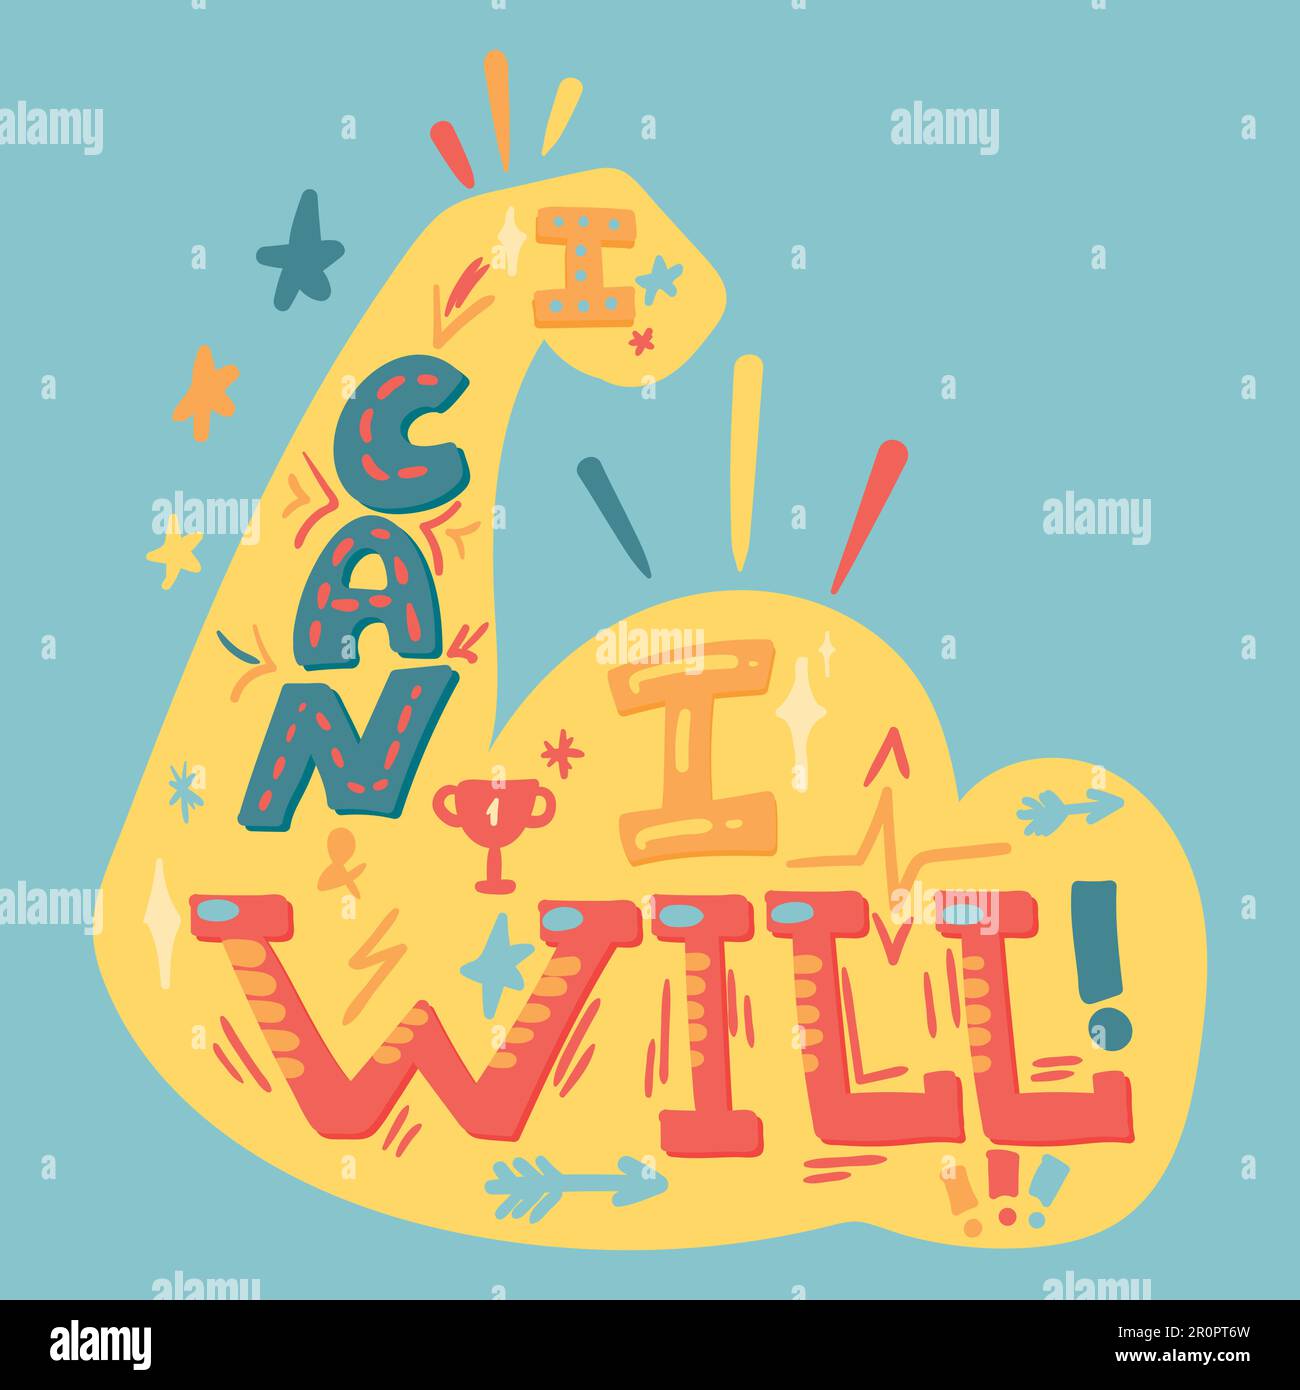 I Can And I Will. Sport Motivation. Hipster flat super slogan. Inspire text design.Vector Stock Vector